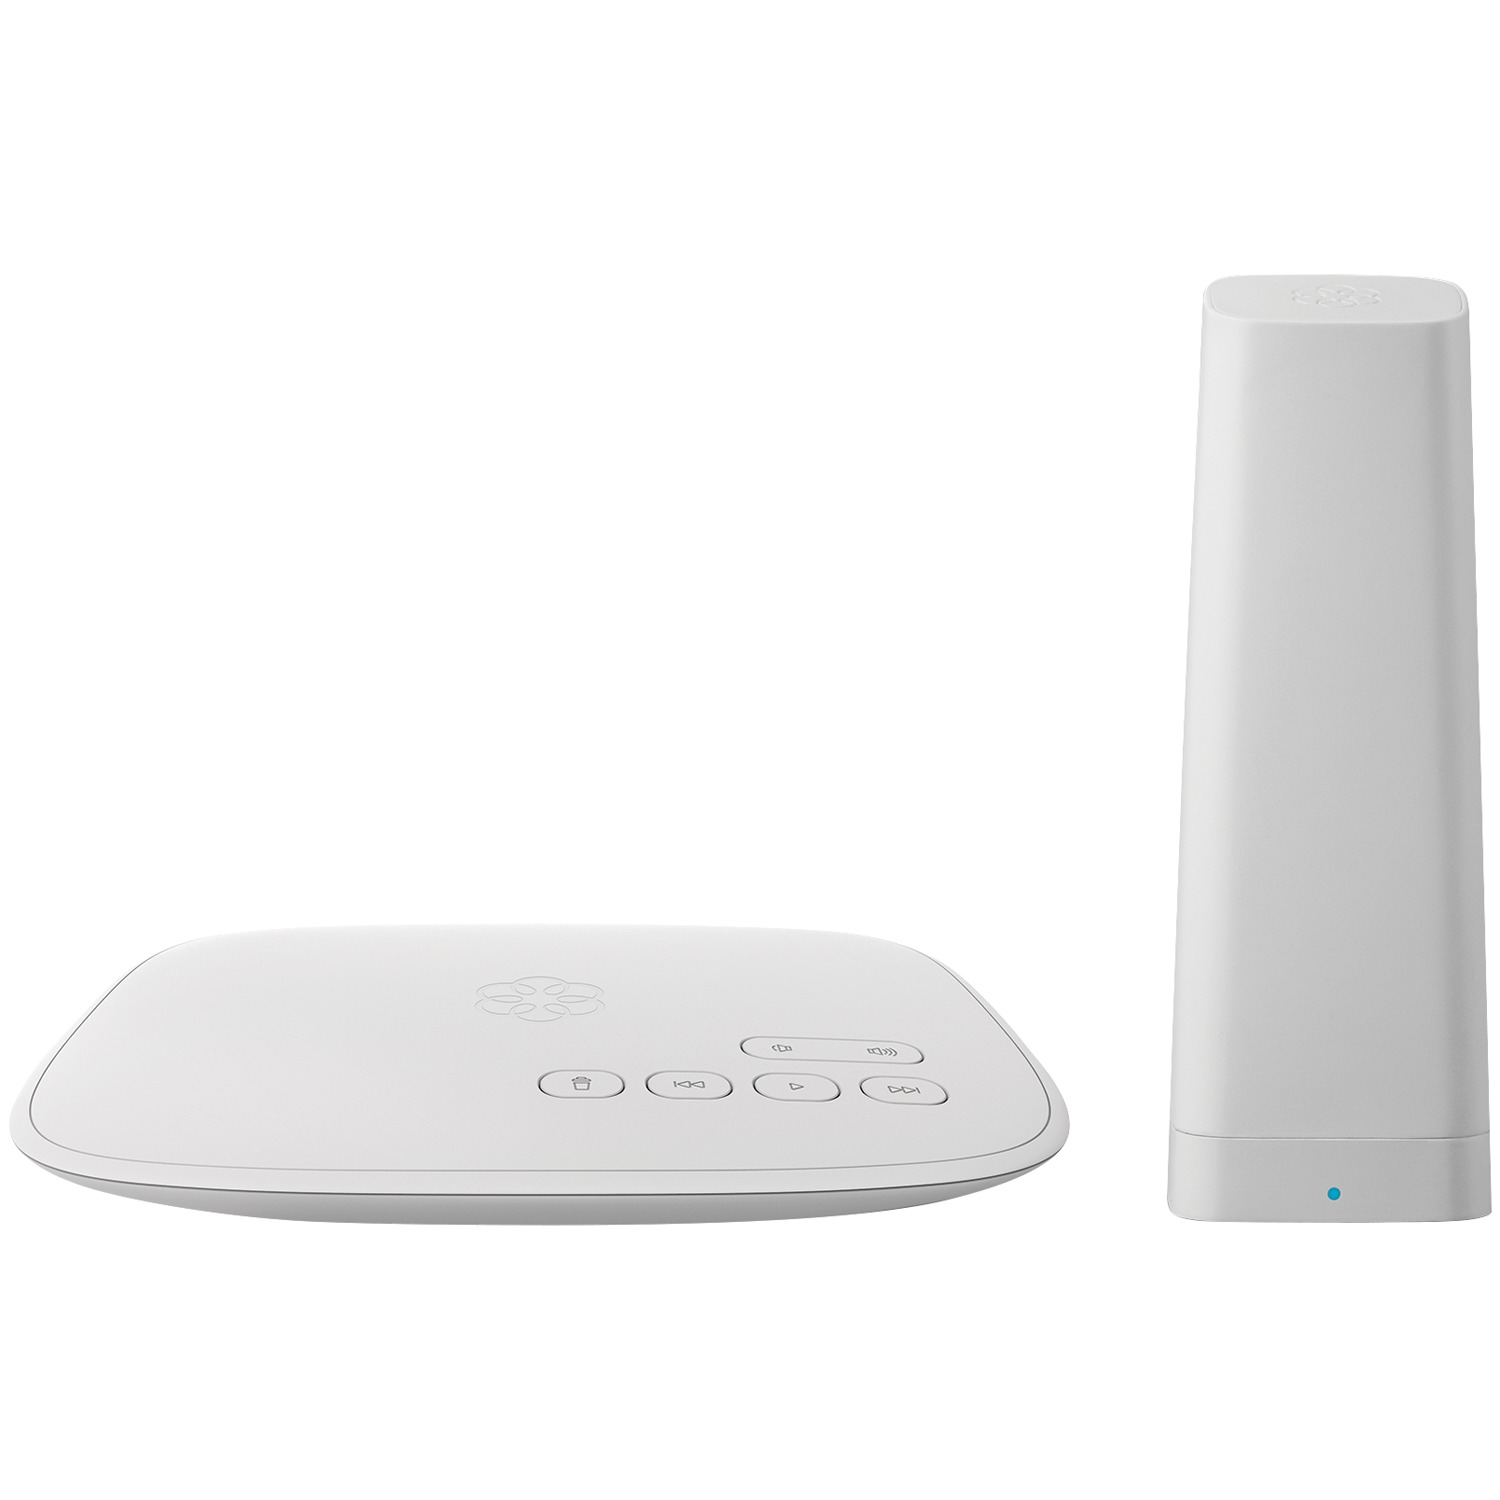 Ooma Phone Genie LTE, Alternative Home Phone Service with No Internet Connection Required - image 2 of 4